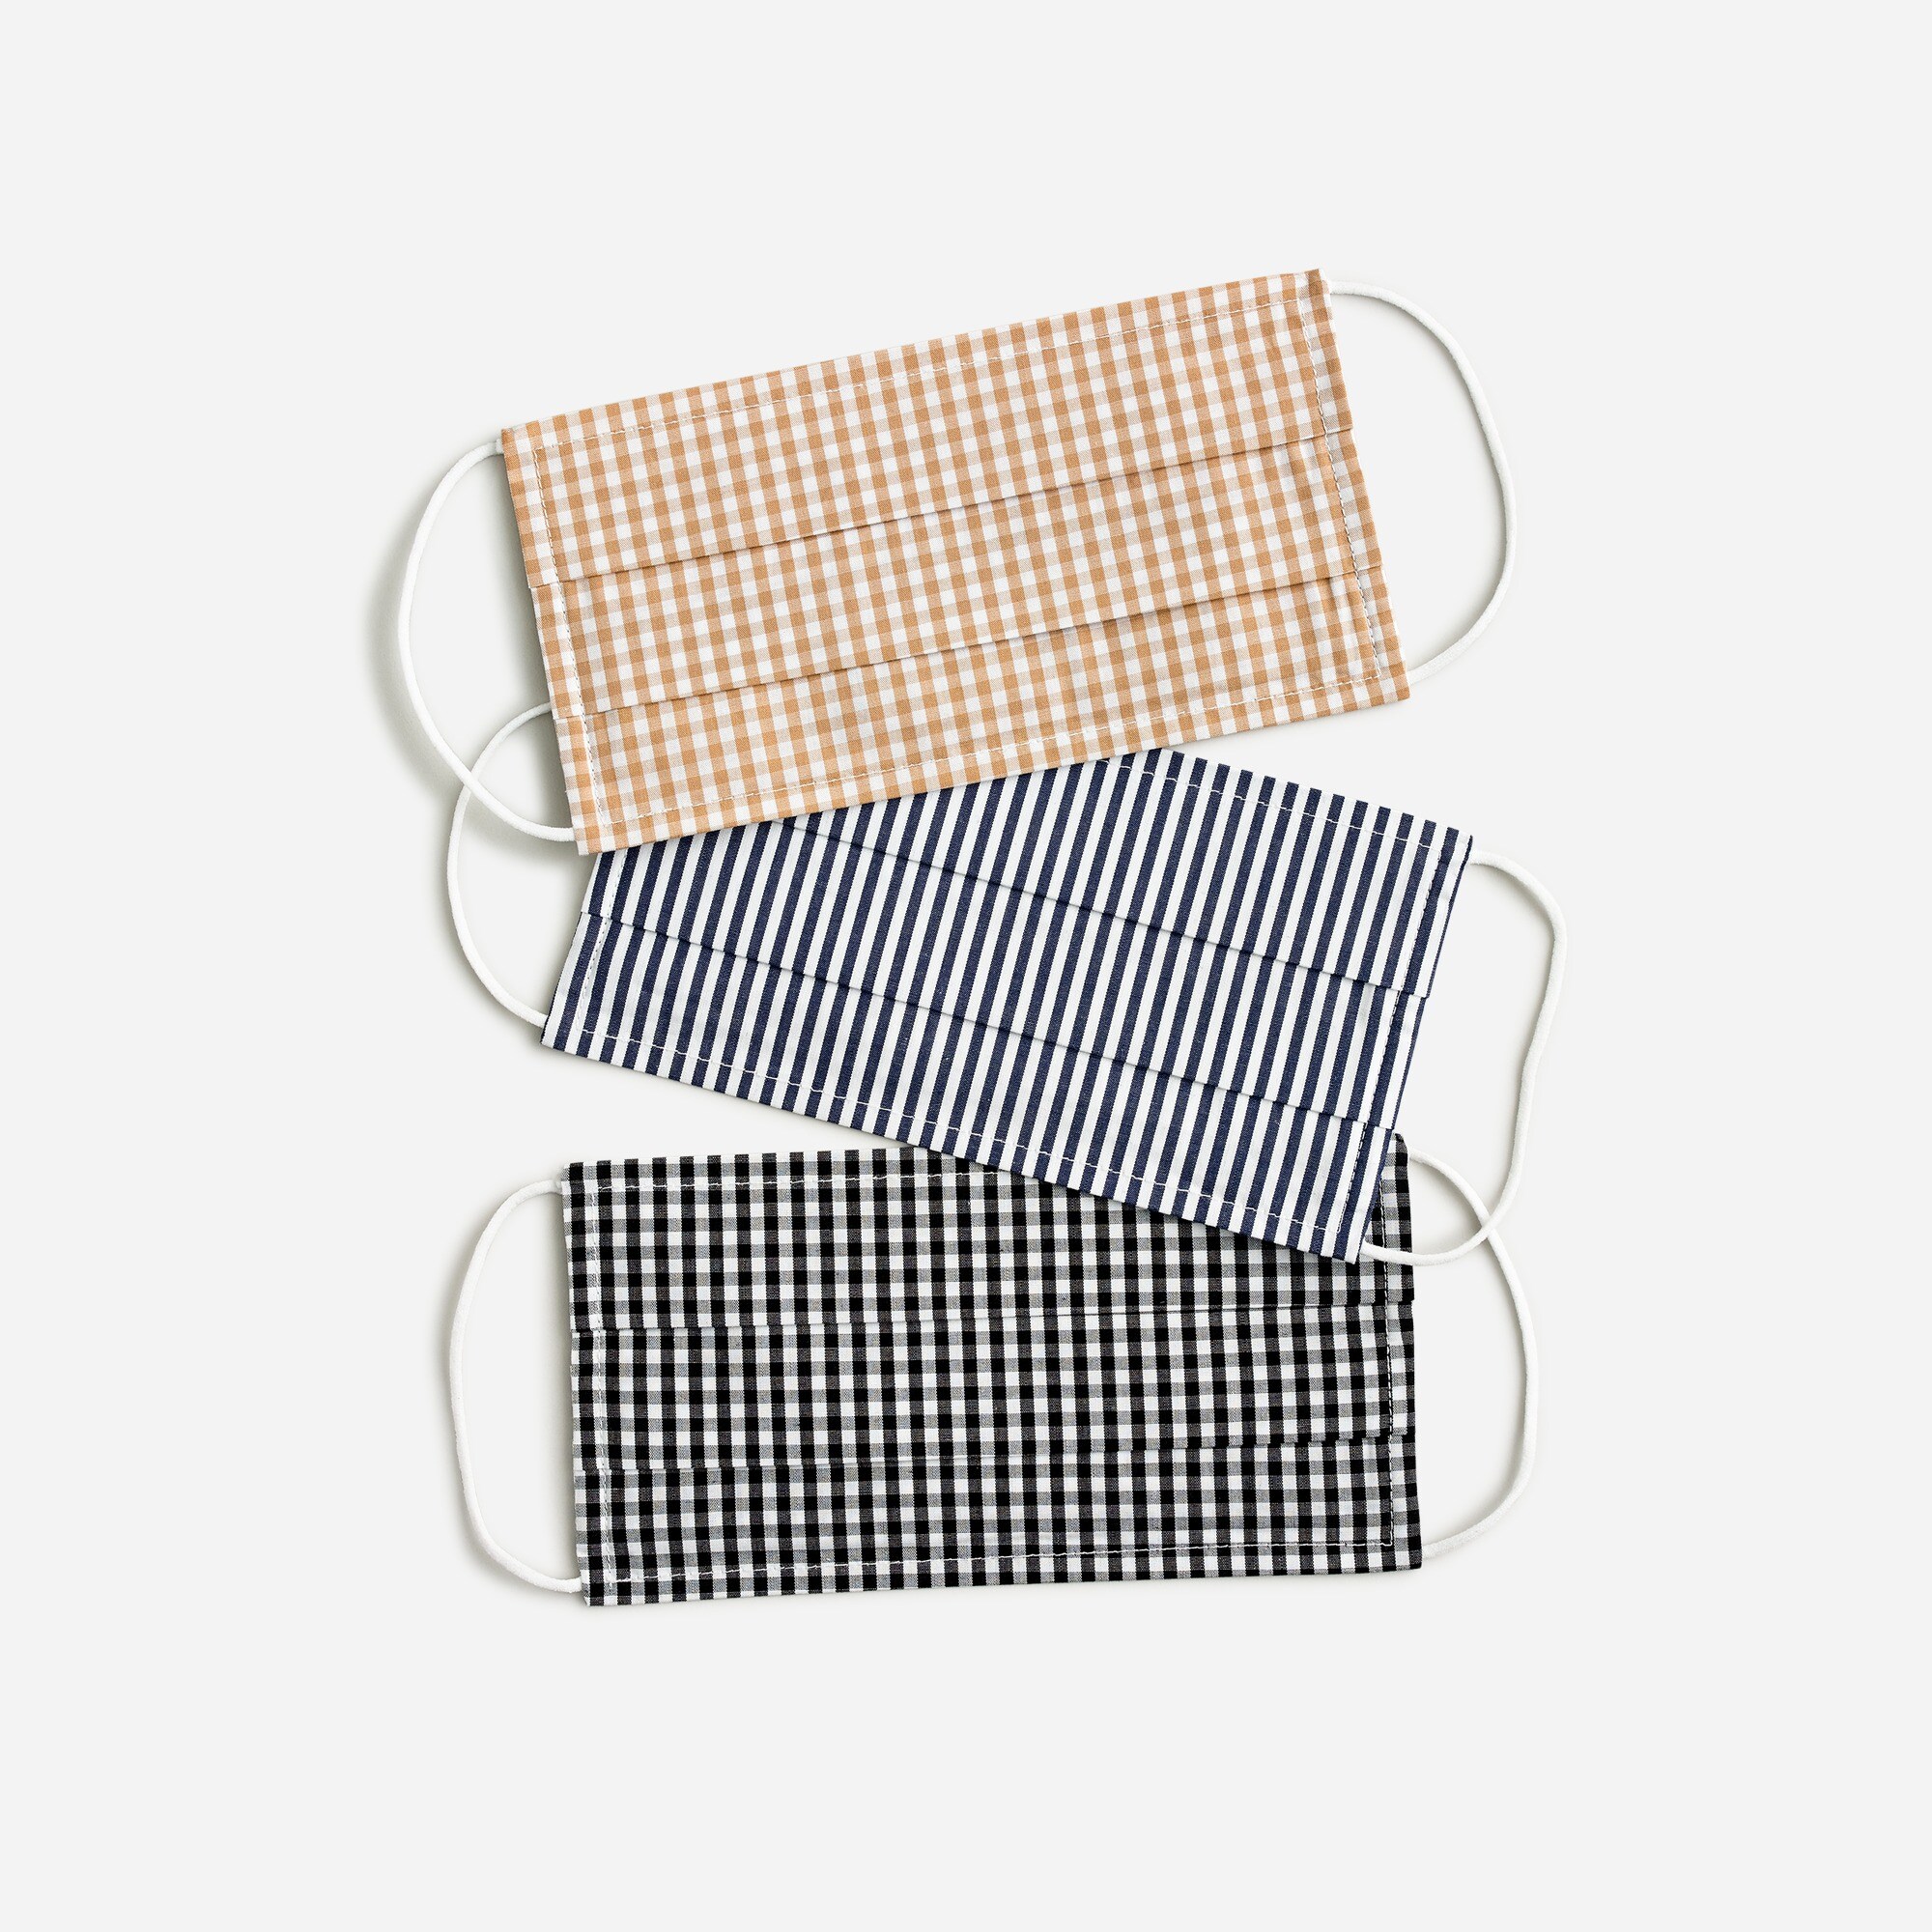  Pack-of-three nonmedical face masks in checks and stripes